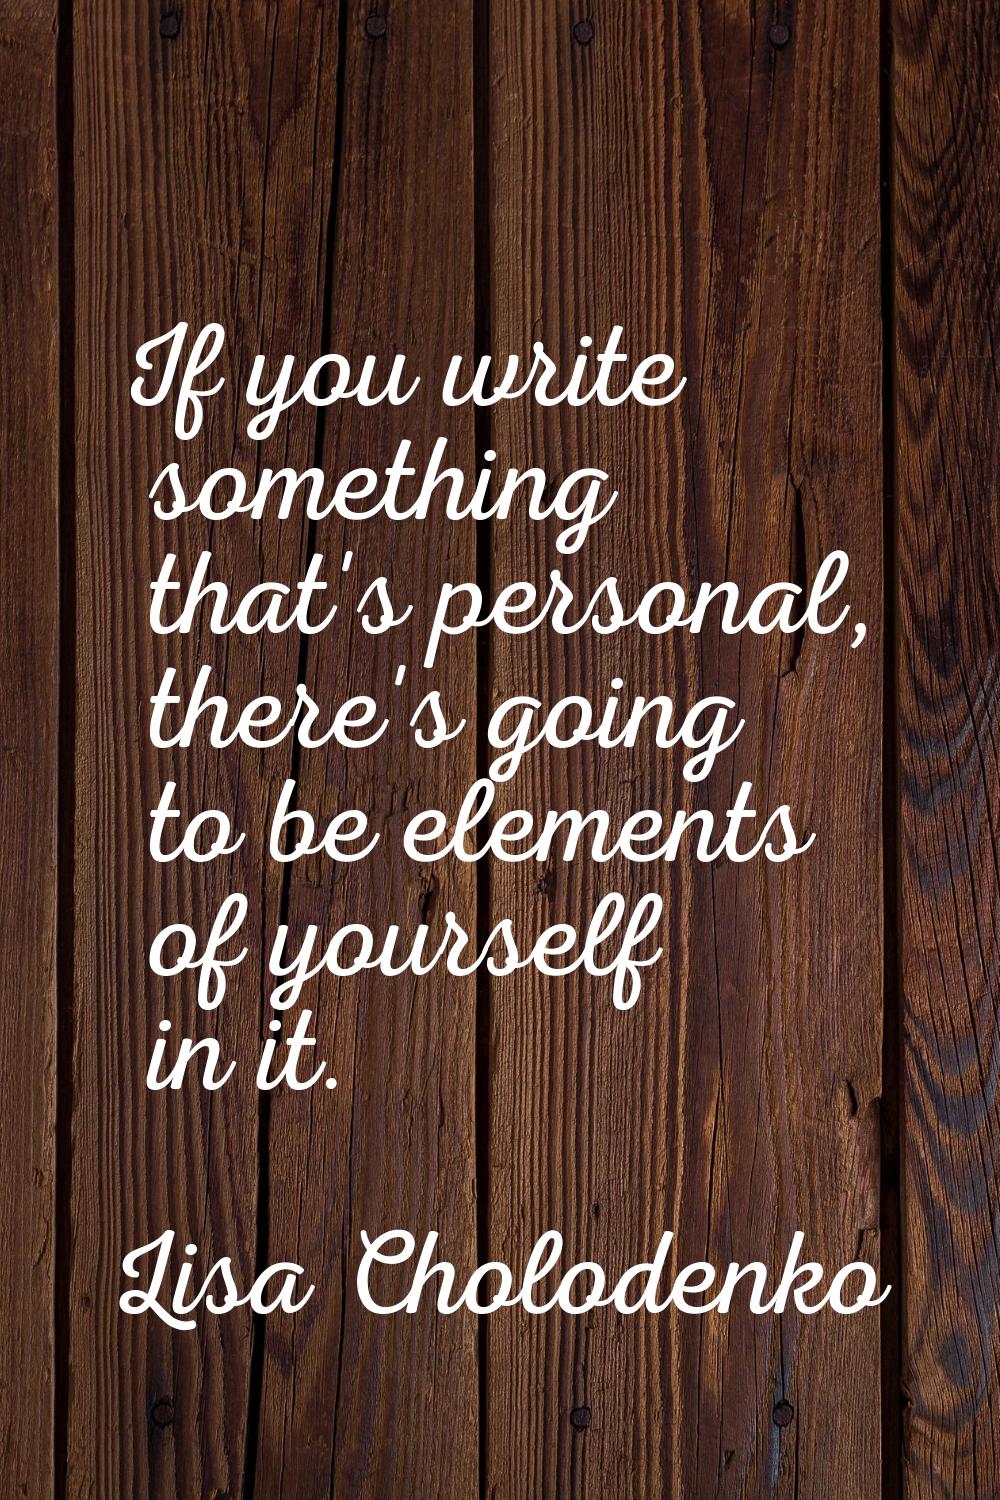 If you write something that's personal, there's going to be elements of yourself in it.